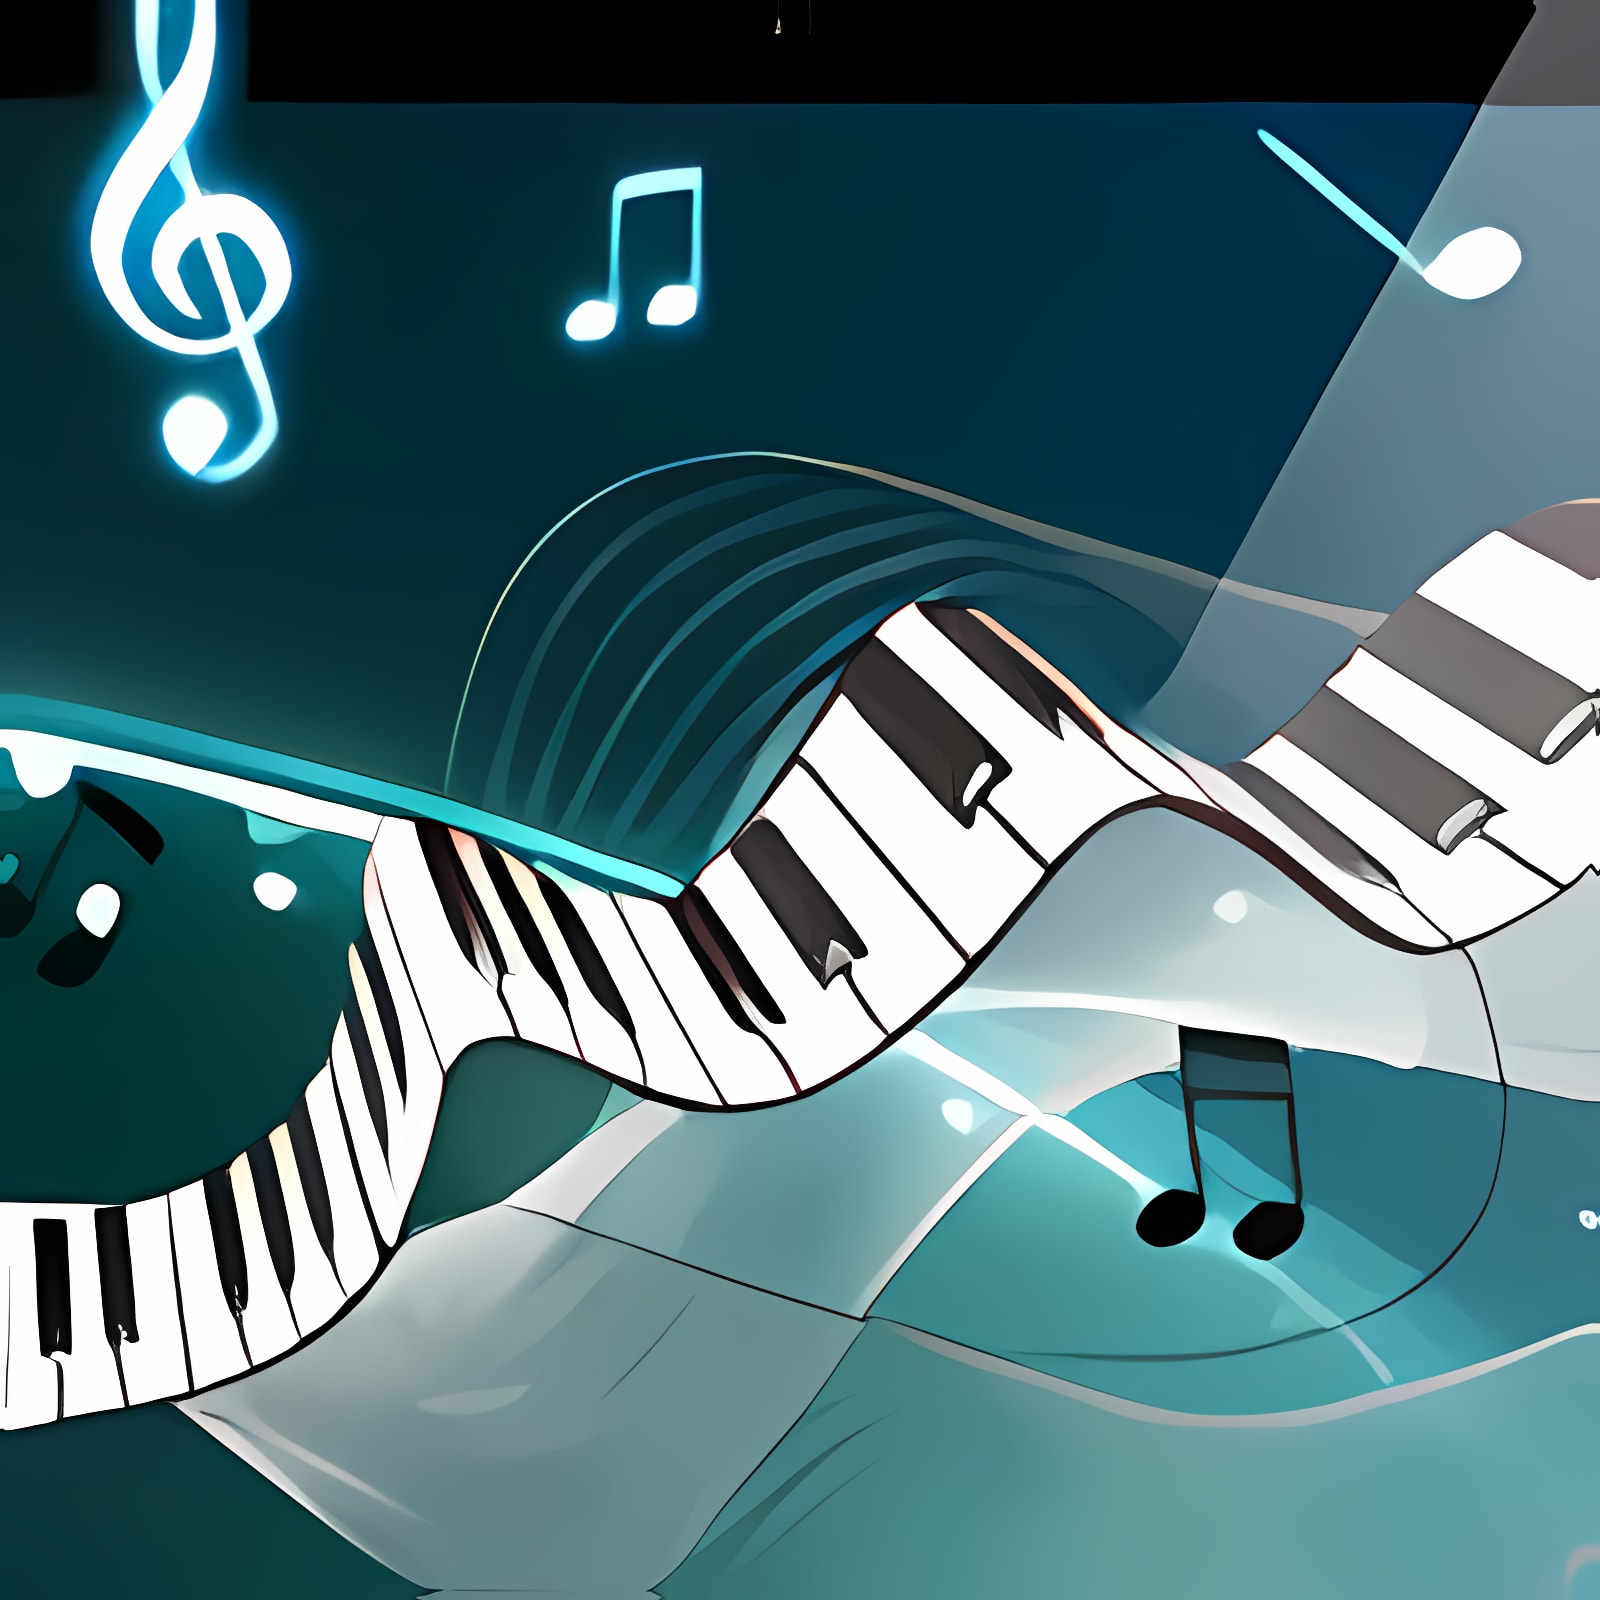 Everyone Piano 2.5.7.28 download the last version for iphone